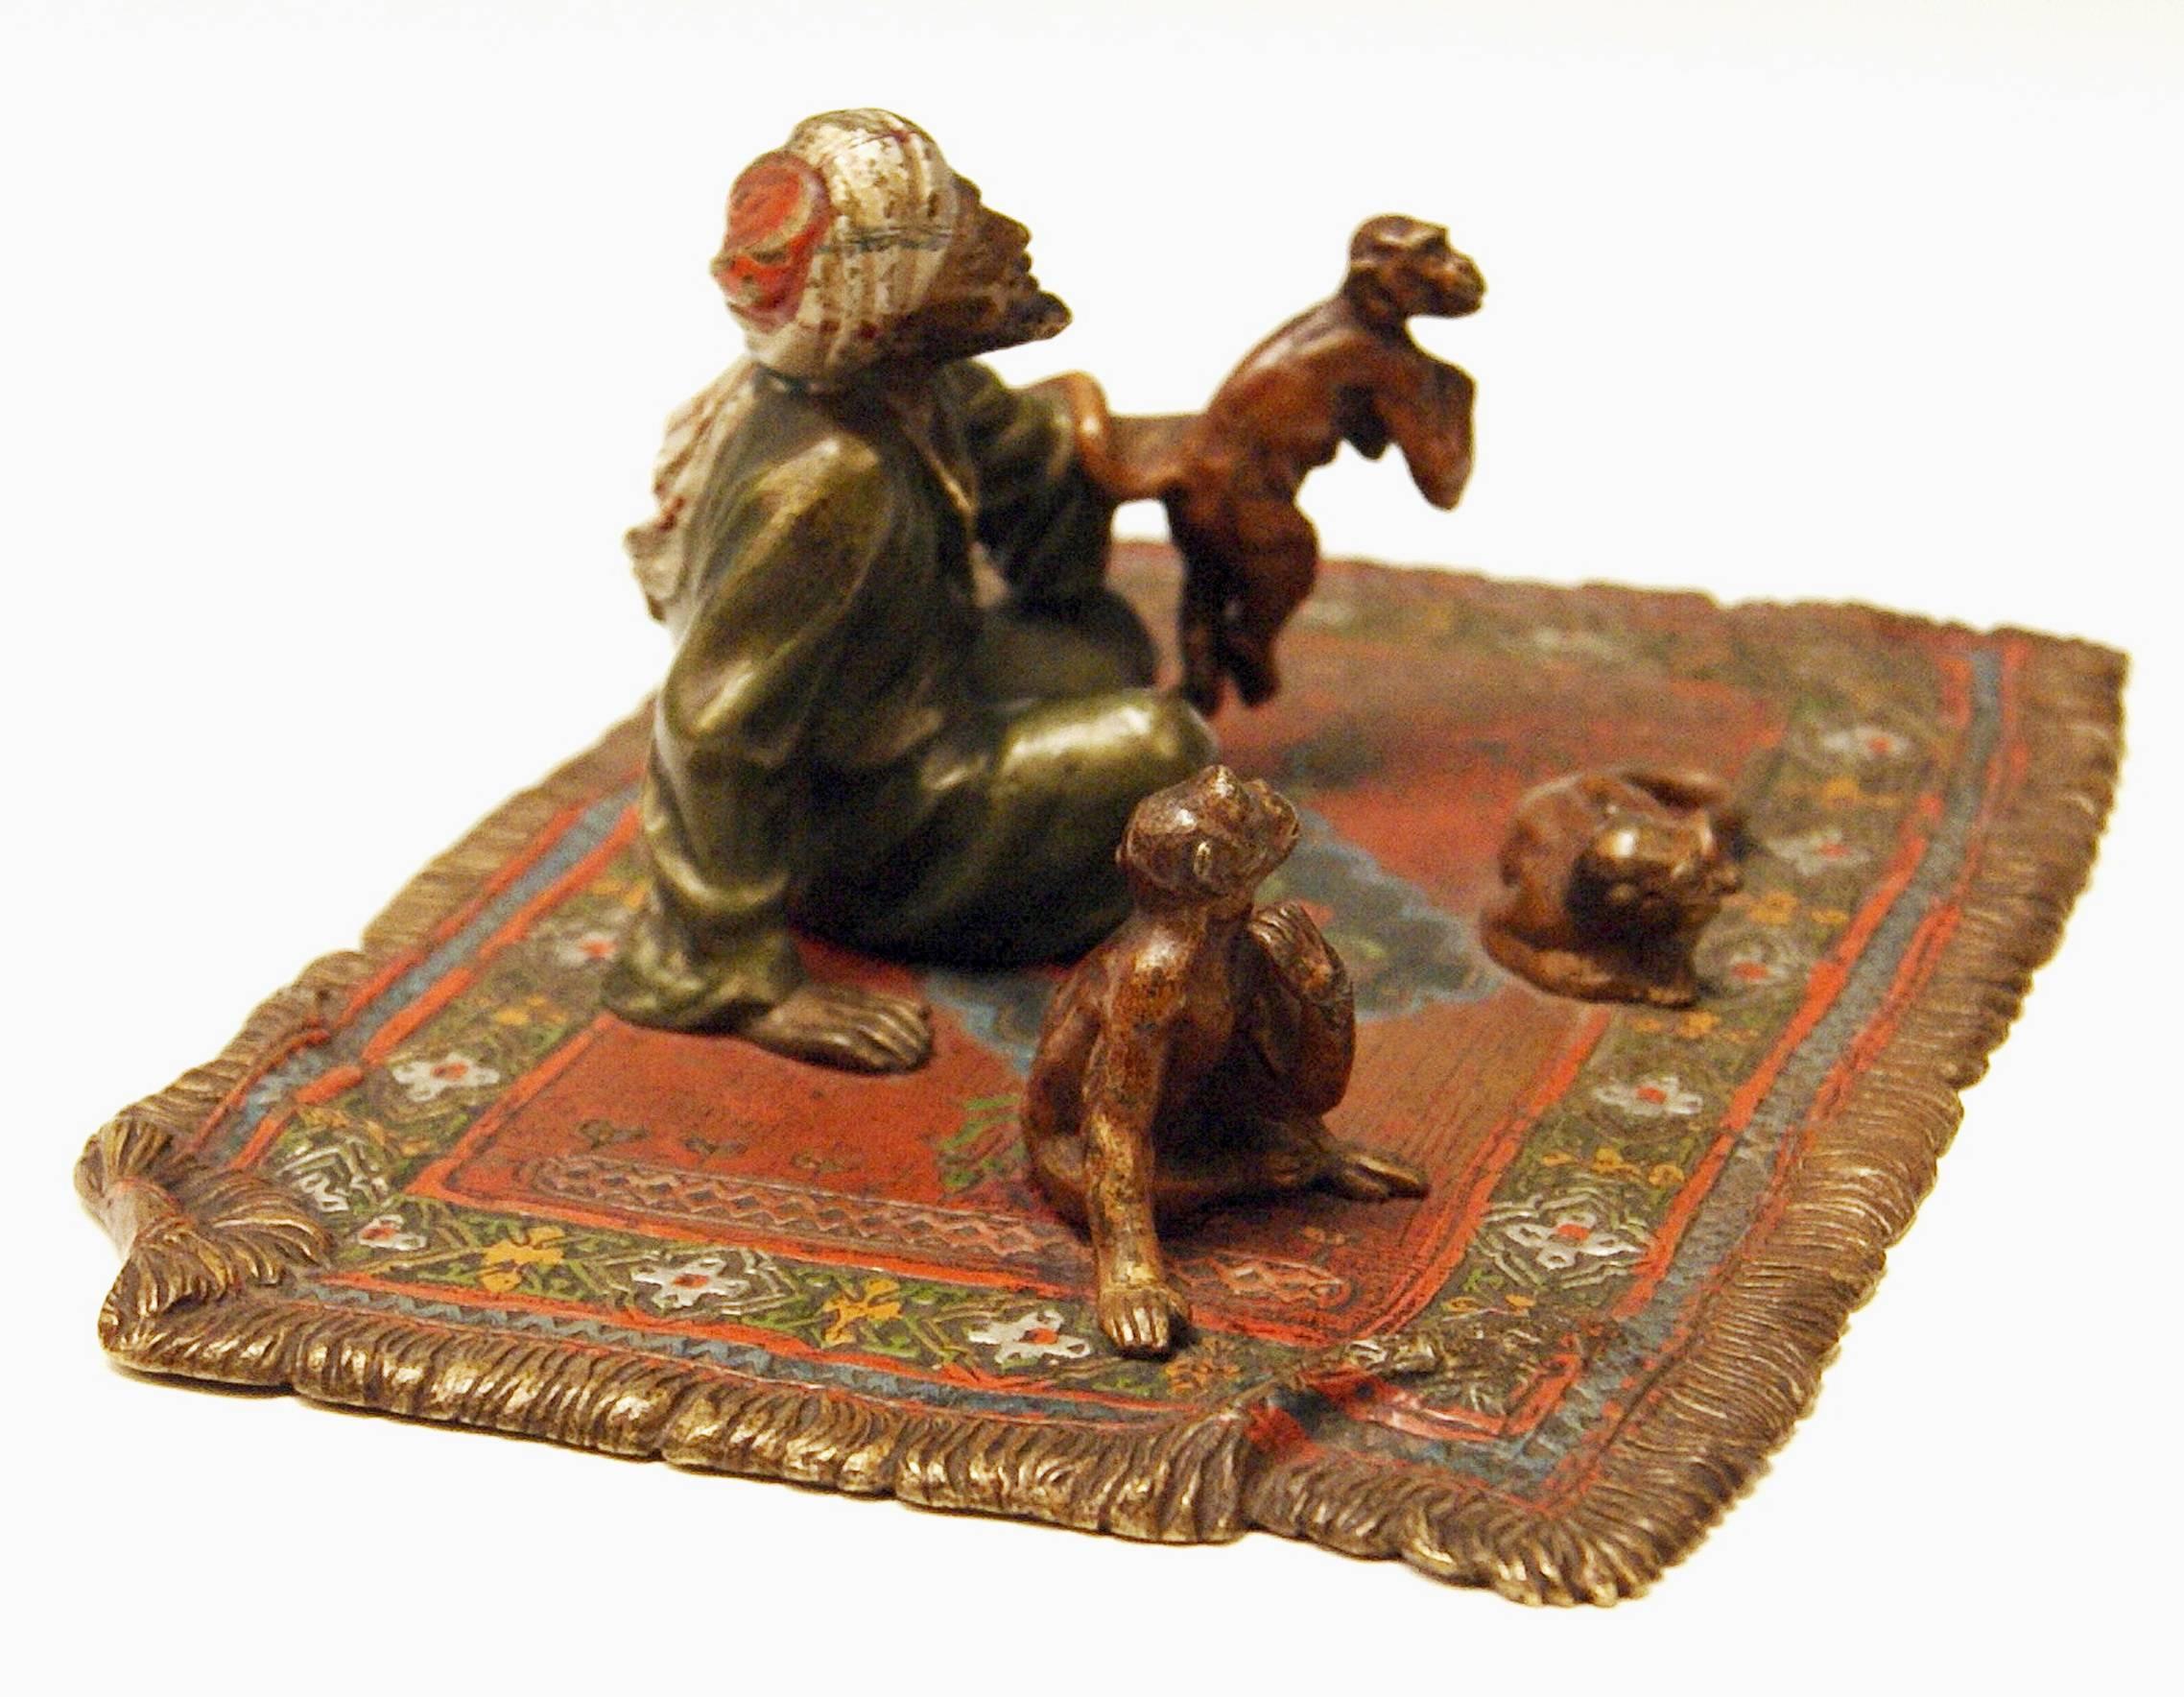 Gorgeous Vienna bronze figurine made by famous manufactory Bergman(n), circa 1900.
The Arab Man is playing with three monkeys: He sits cross-legged on a carpet, the man has seized one of the monkeys by right raised hand whereas the second monkey is